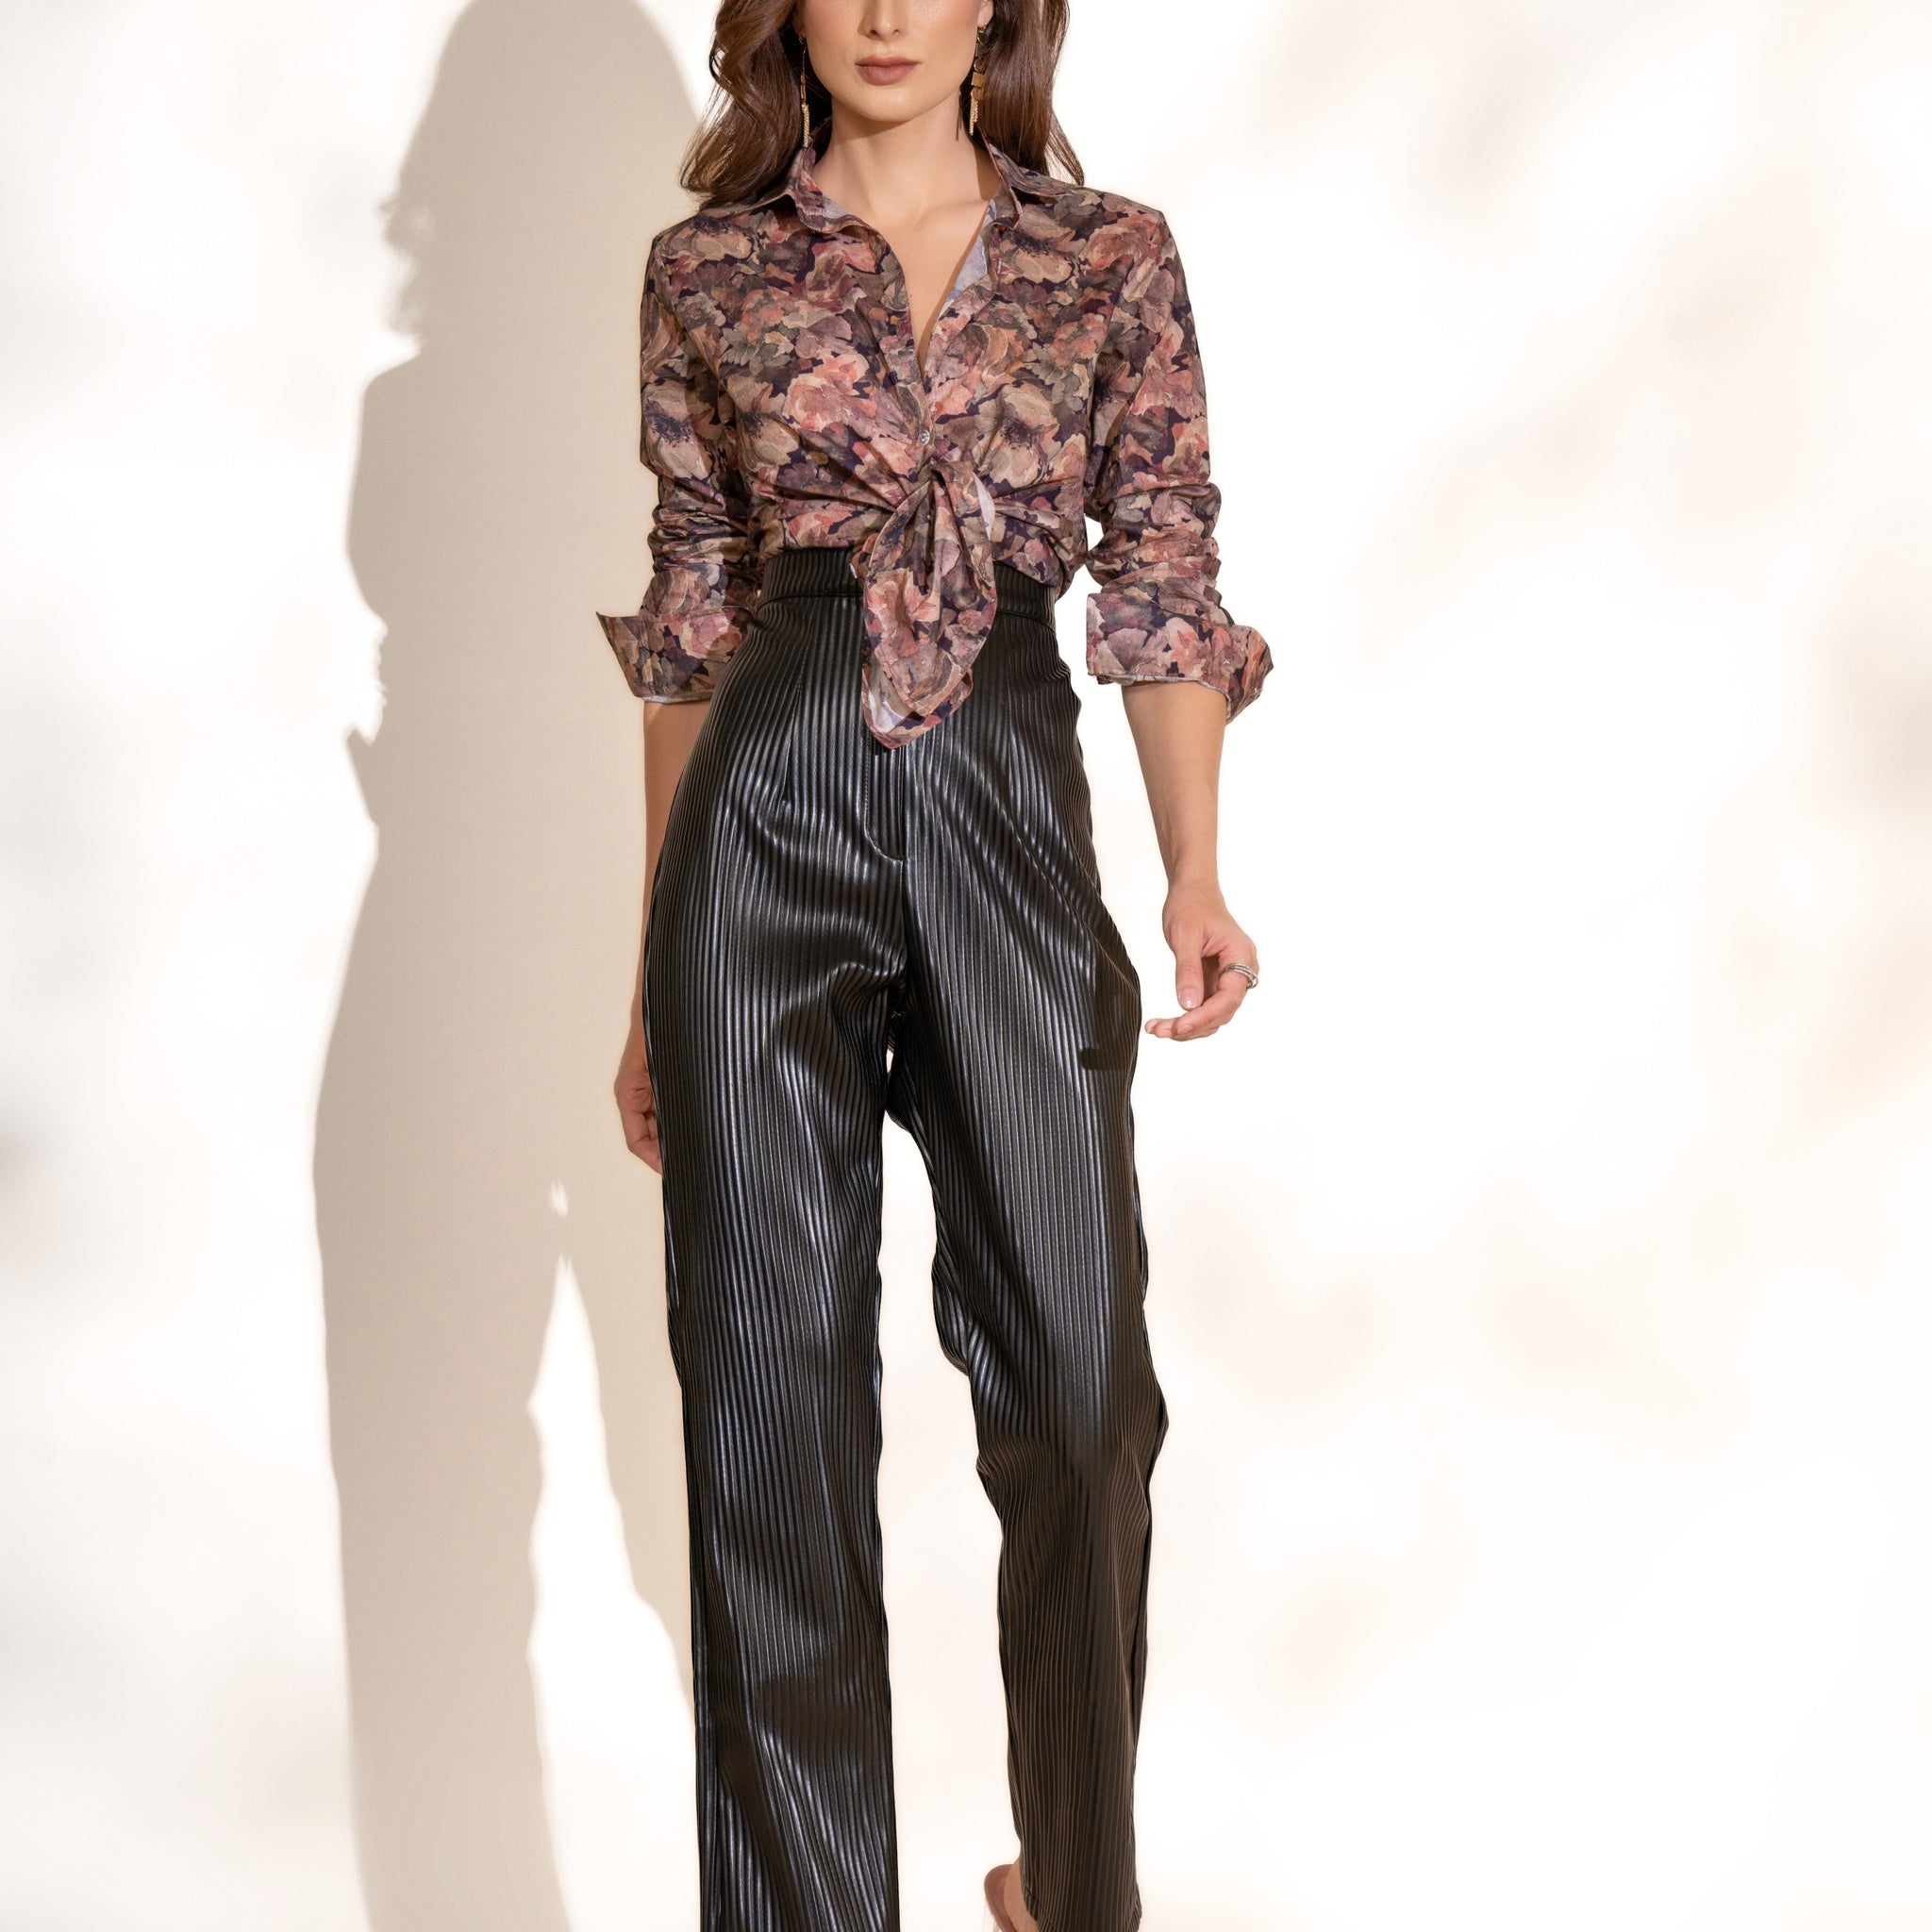 Mulberry Printed Shirt and Black Pleated Pants Co-ord Set